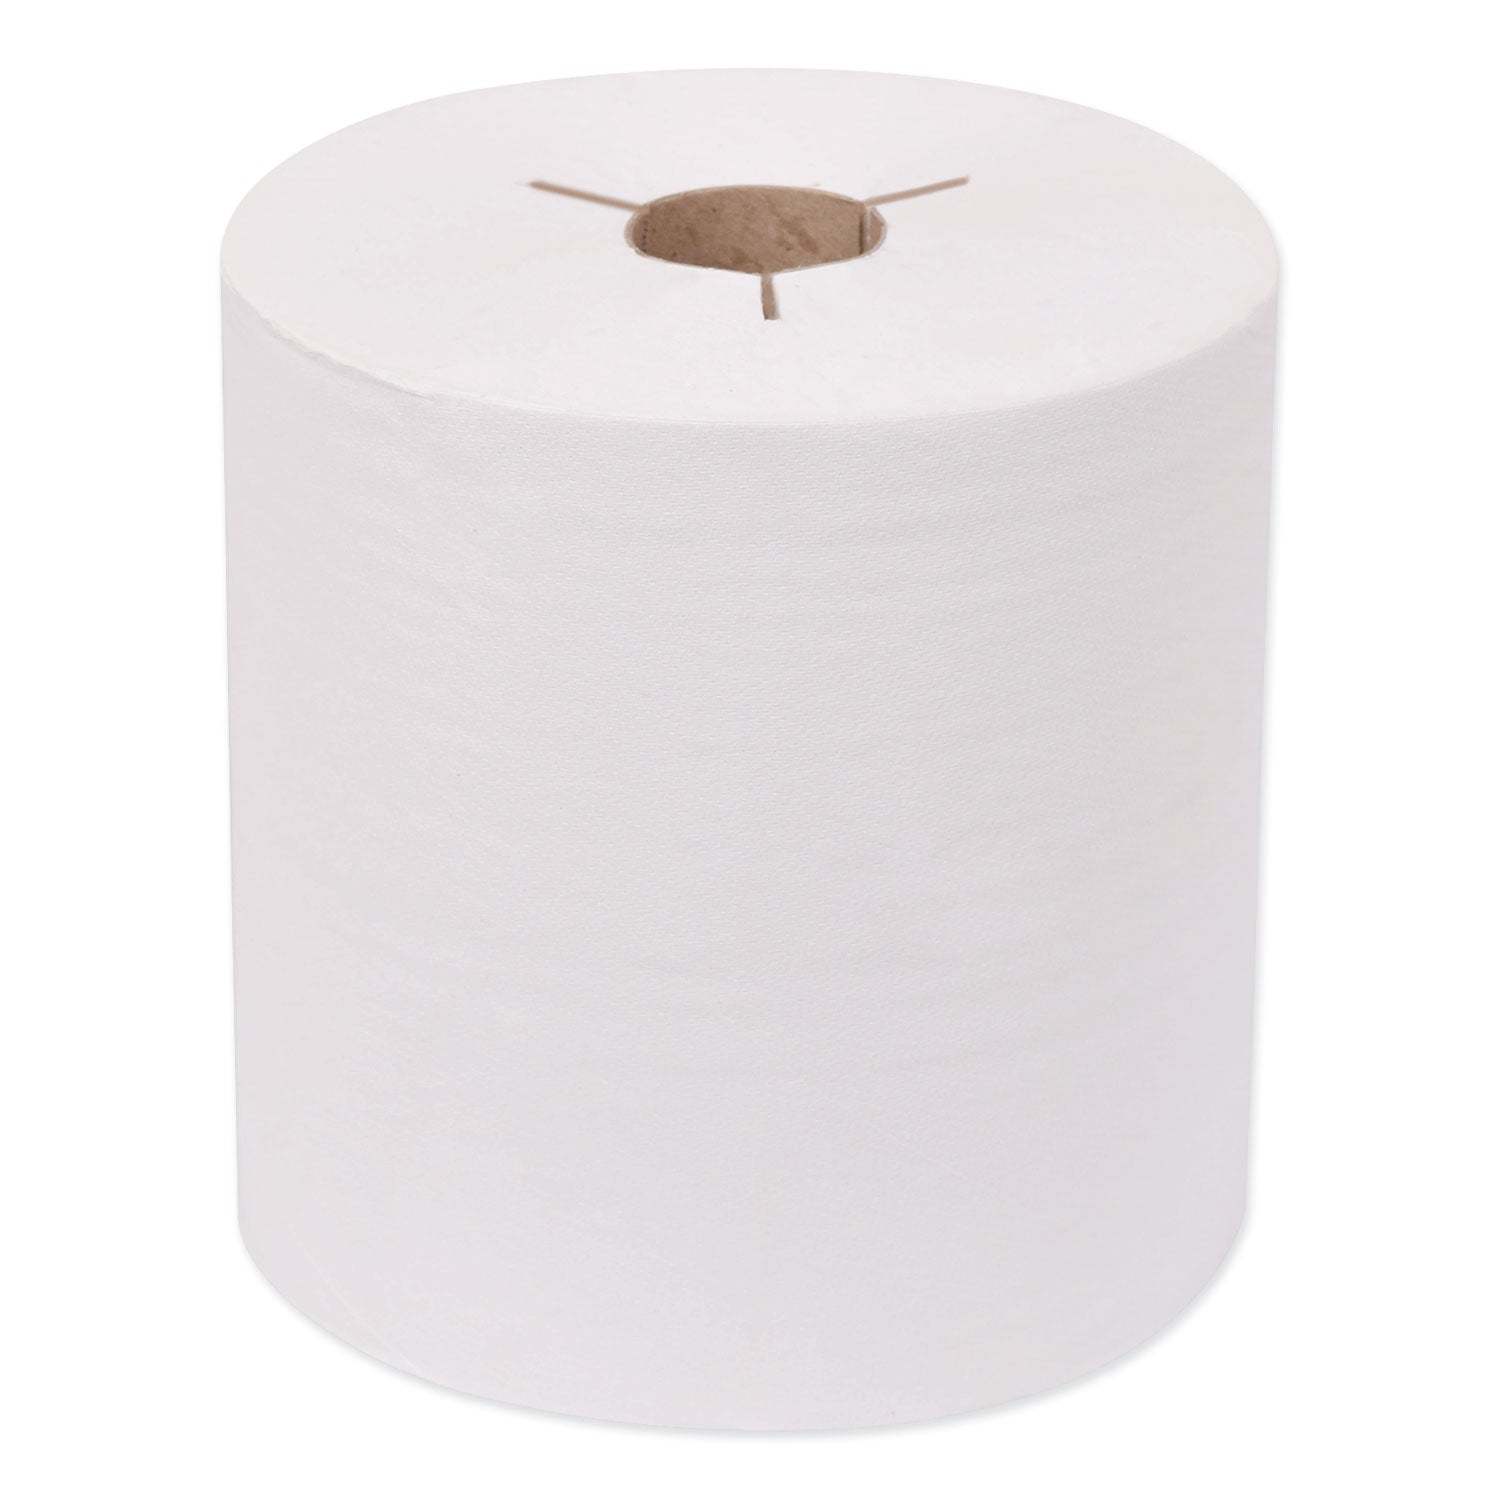 universal-hand-towel-roll-notched-1-ply-75-x-630-ft-white-6-rolls-carton_trk8031600 - 1